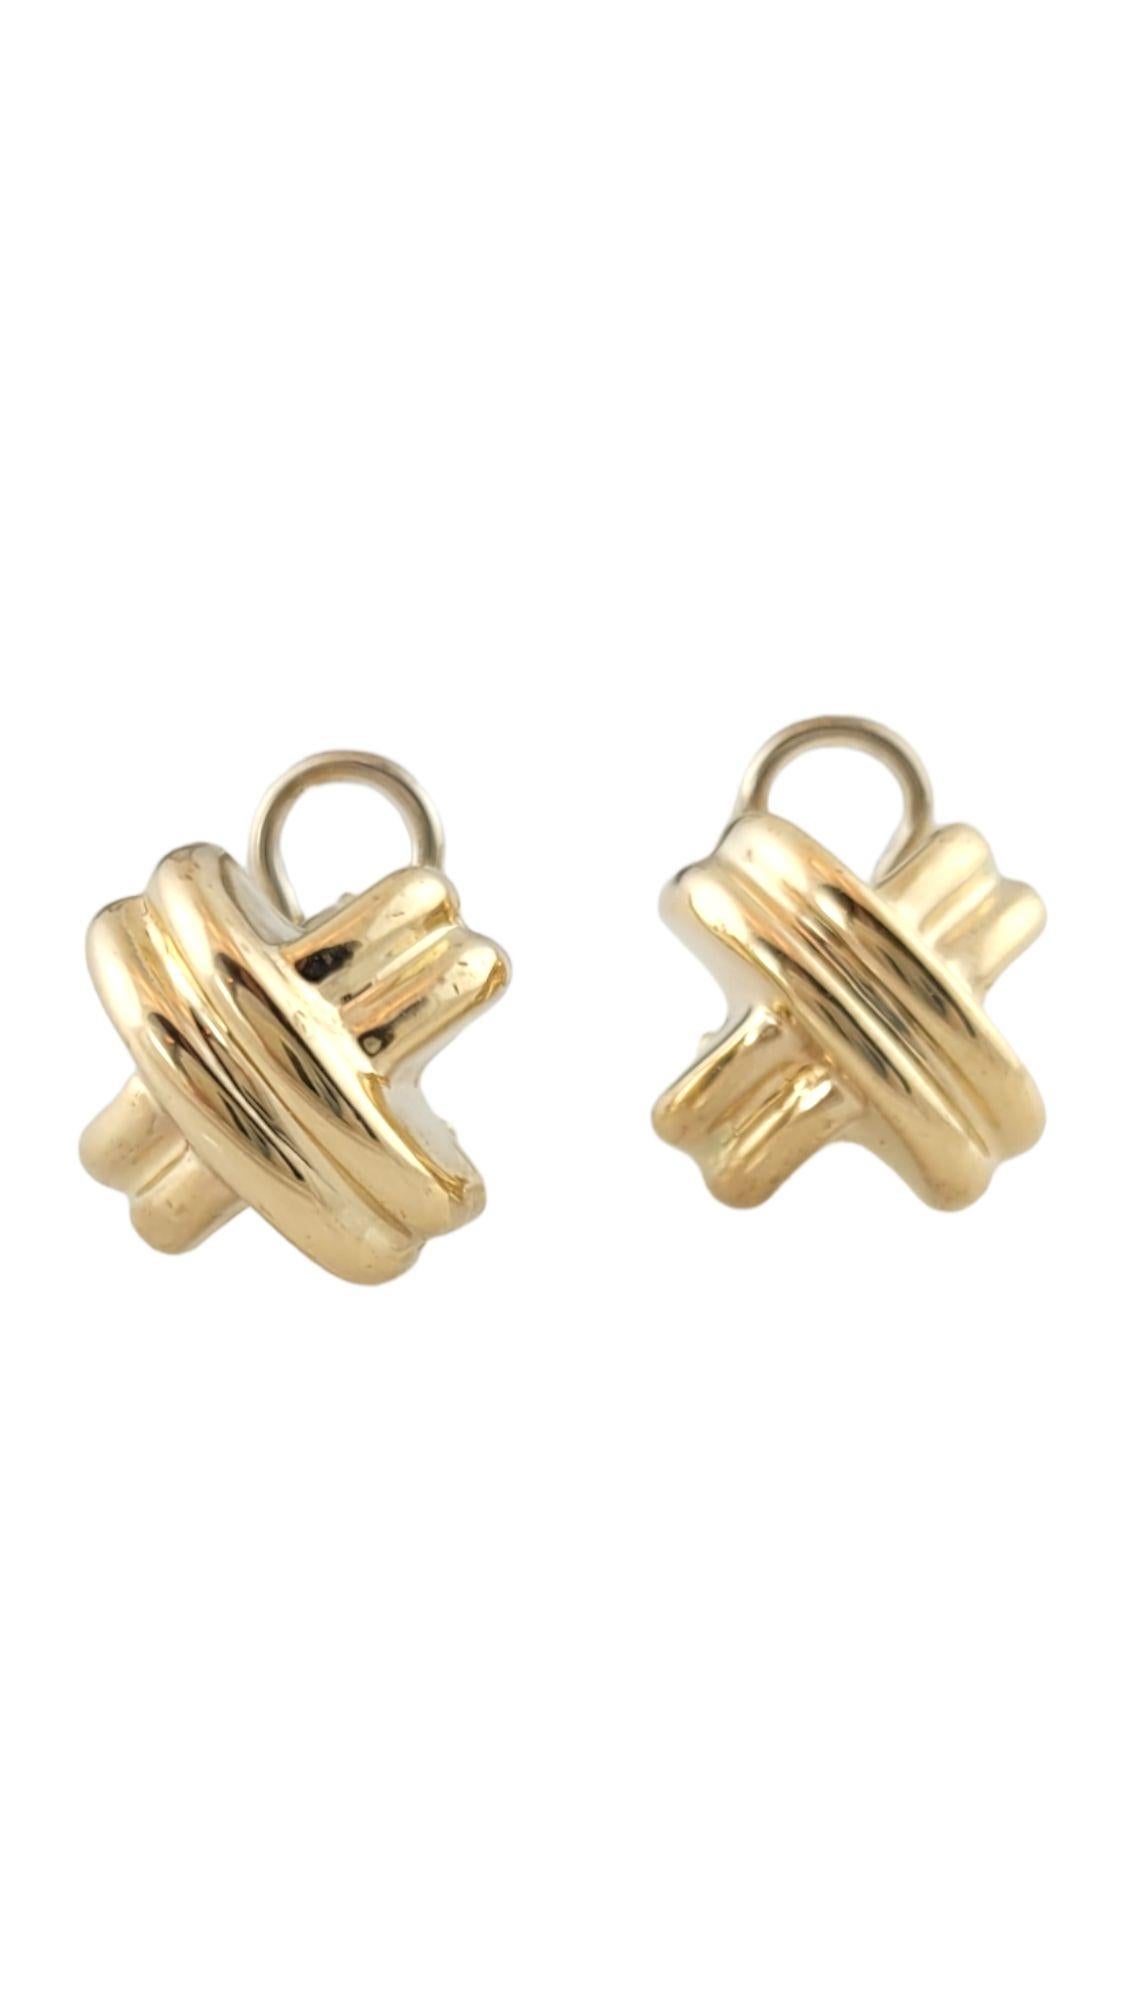 These beautiful 14K gold knot earrings will look great on everyone!

Size: 13.8mm X 13.8mm X 7.2mm

Weight: 4.60 g/ 3.0 dwt

Hallmark: 585

Very good condition, professionally polished.

Will come packaged in a gift box or pouch (when possible) and